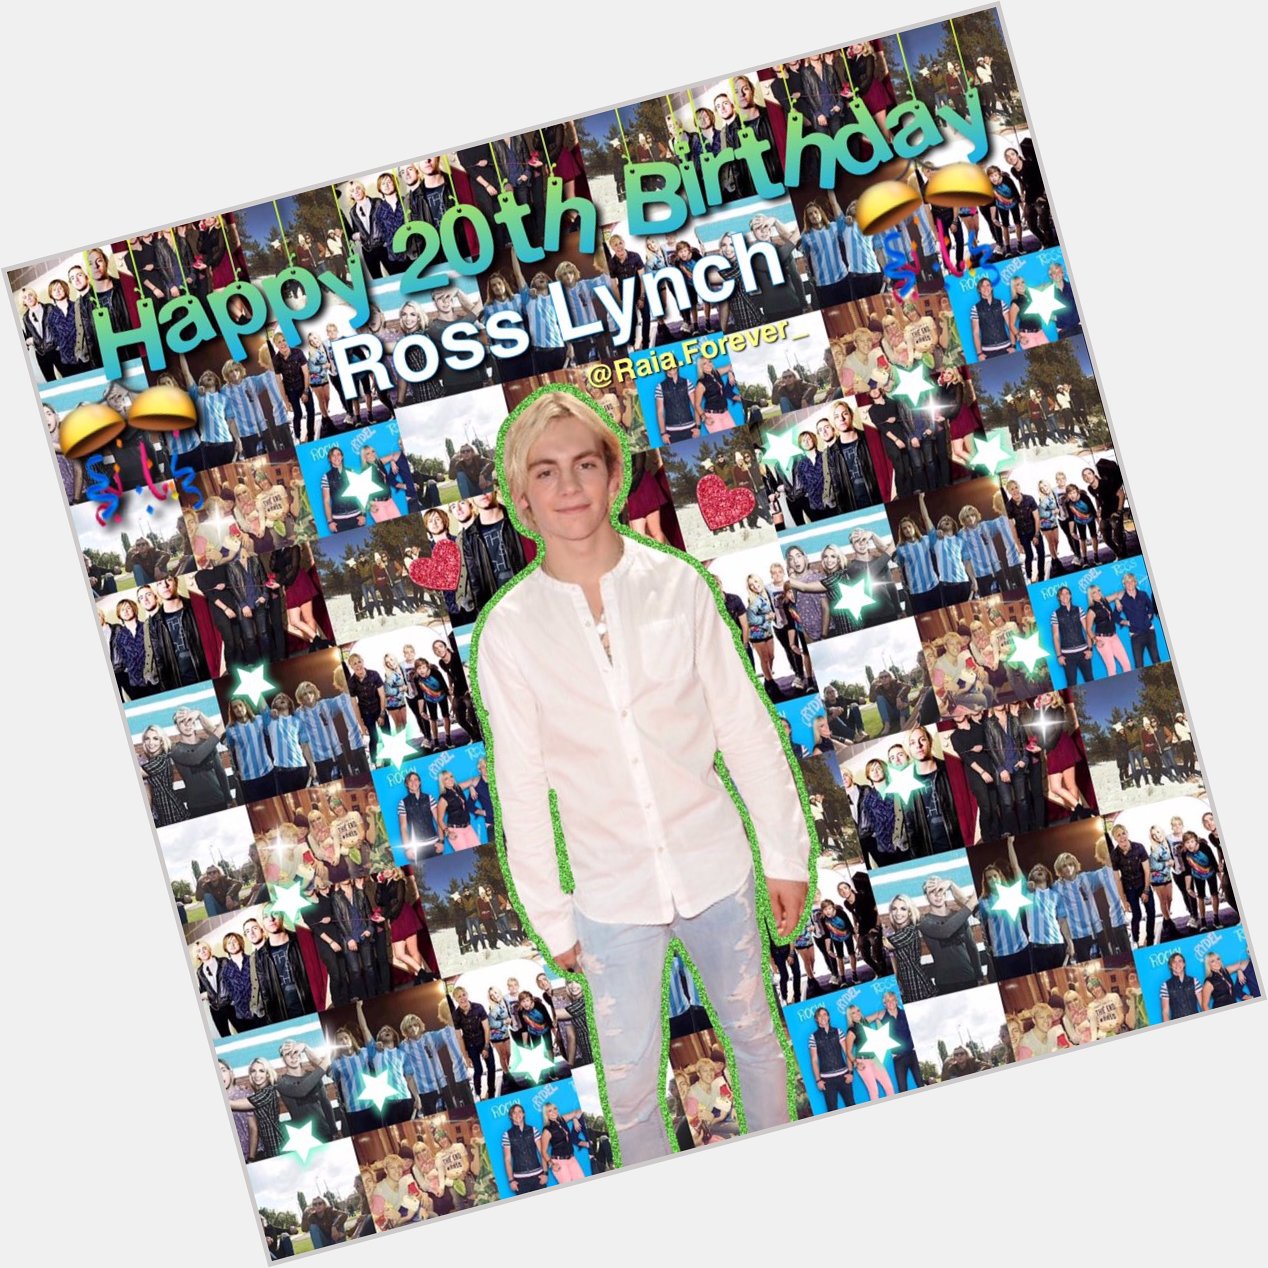 Happy birthday Ross lynch your the best happy birthday ! I love you so much !! Hope you have great B-day 